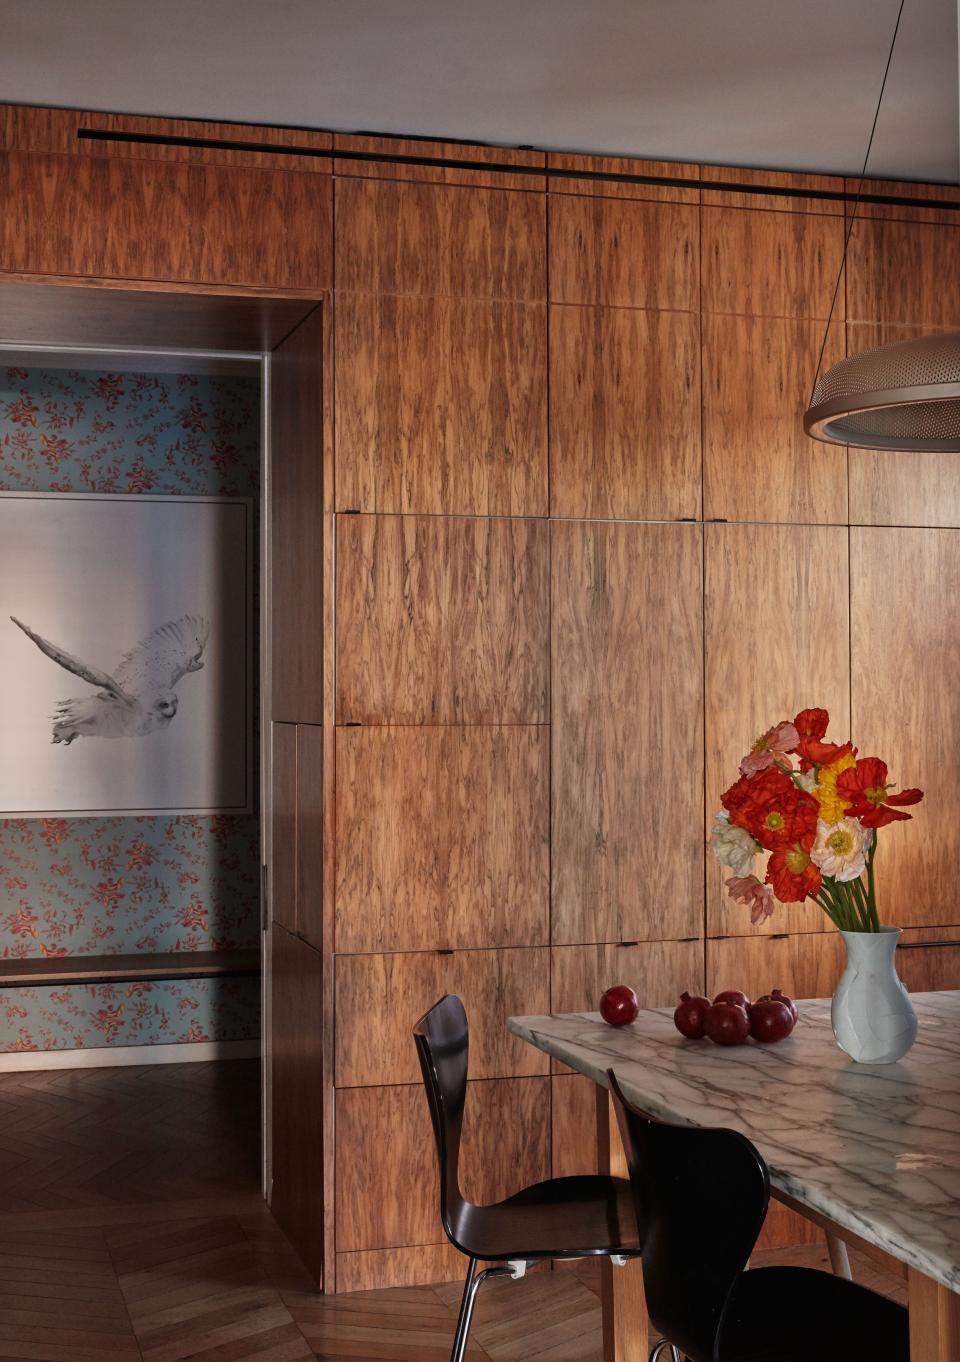 The wood-paneled kitchen, with a view of a Zuckerman photograph and Superflower’s Cannonball wallpaper beyond.